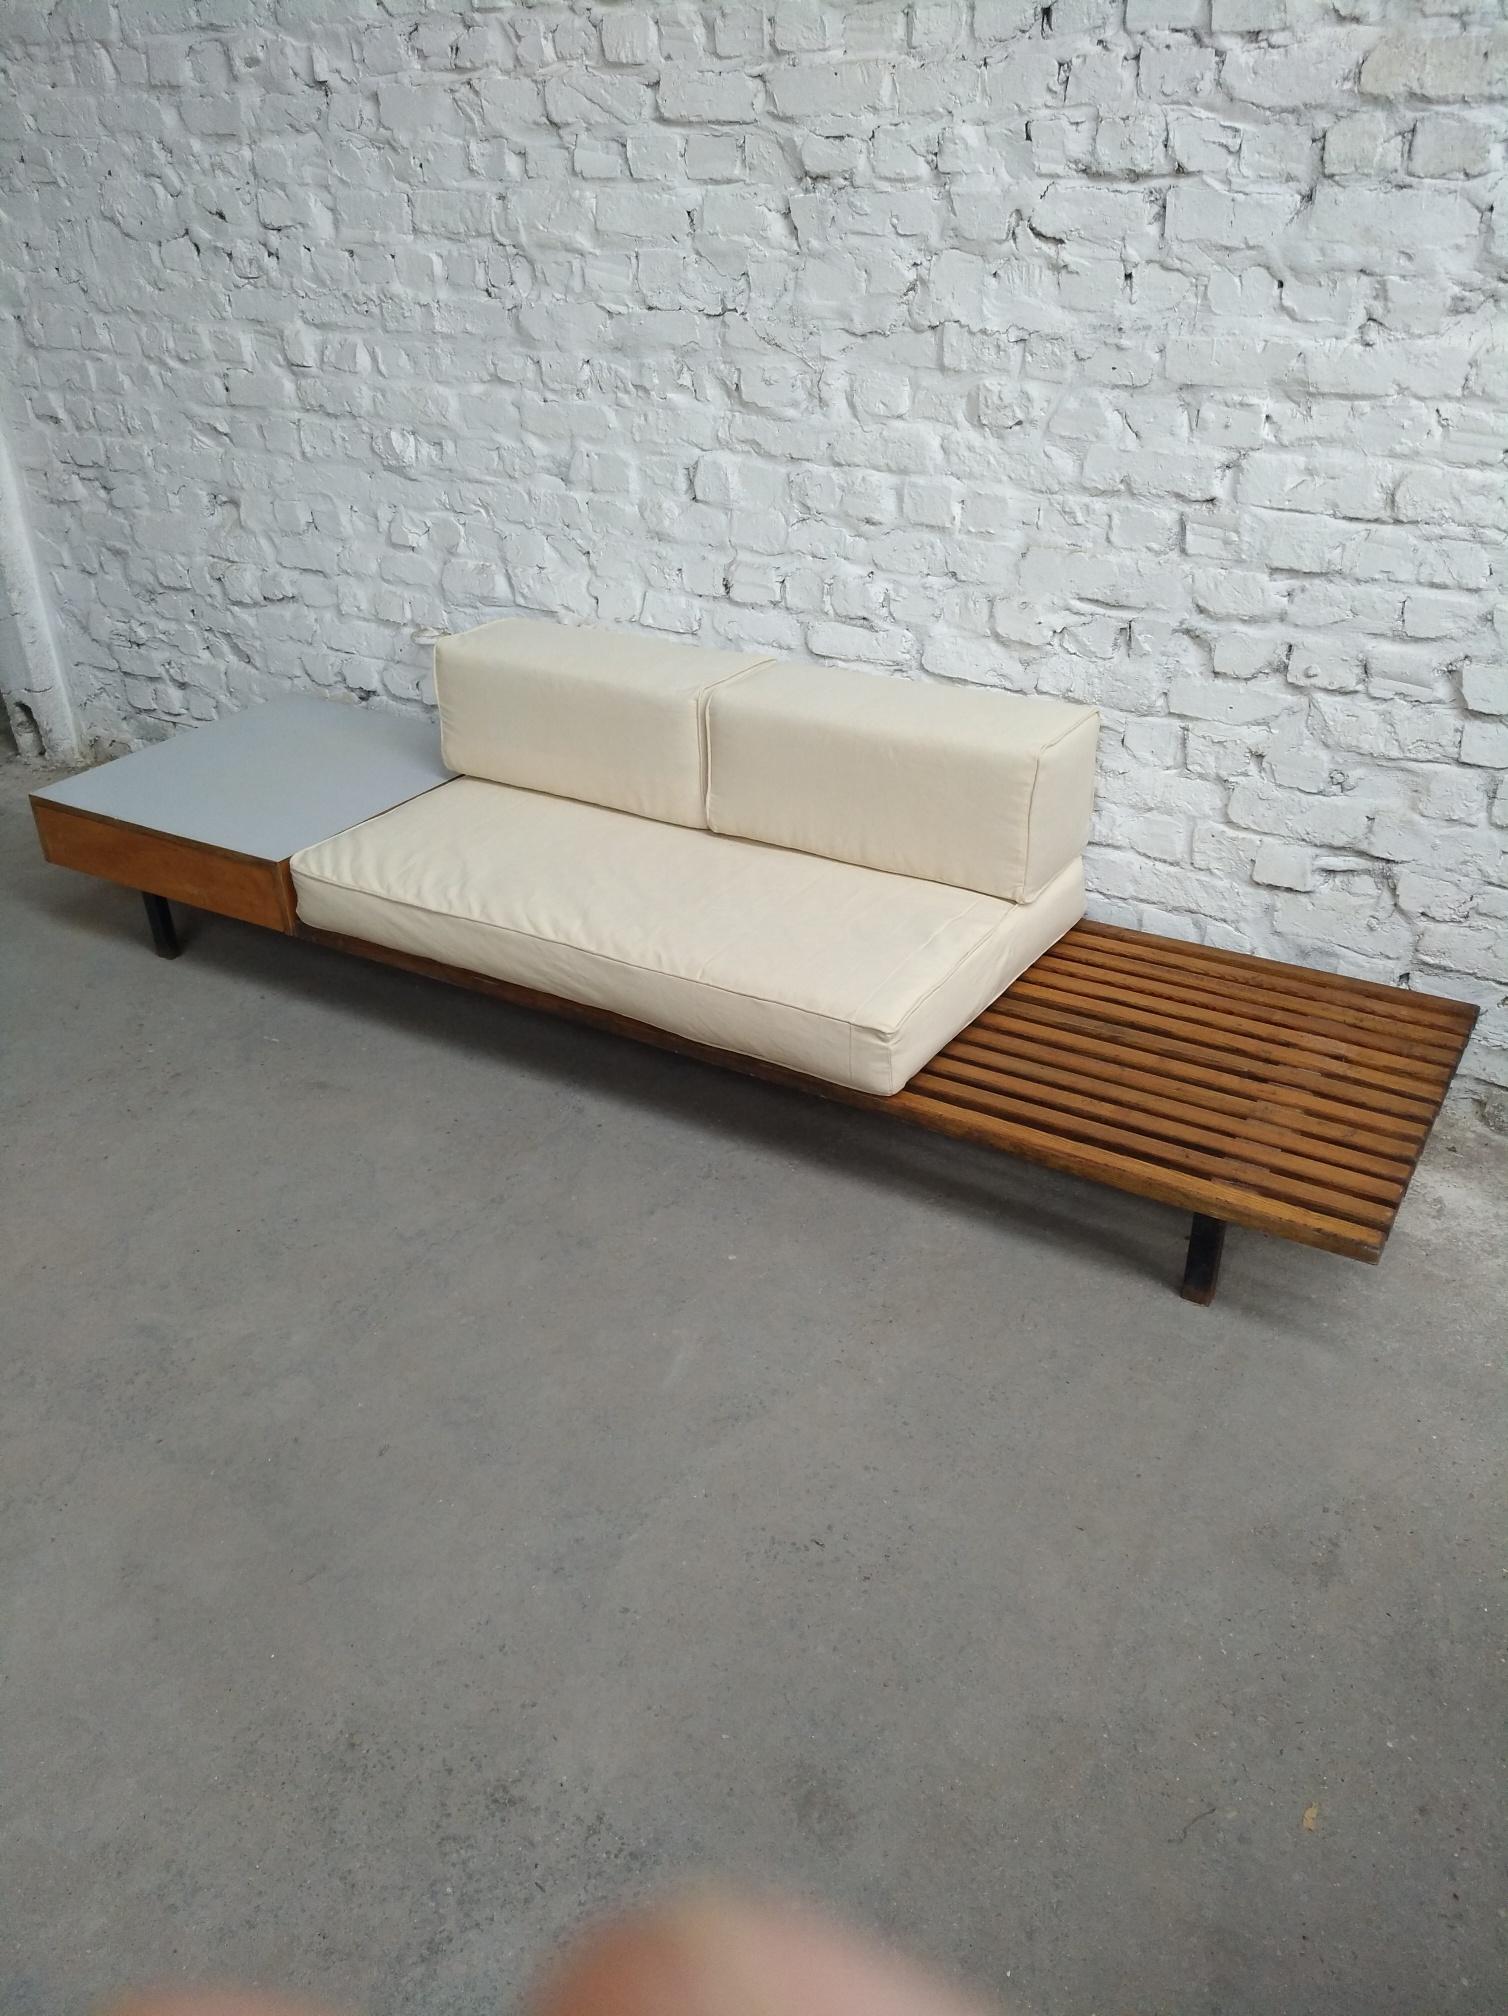 Modern Charlotte Perriand Cansado bench daybed Steph Simon France 1959 For Sale